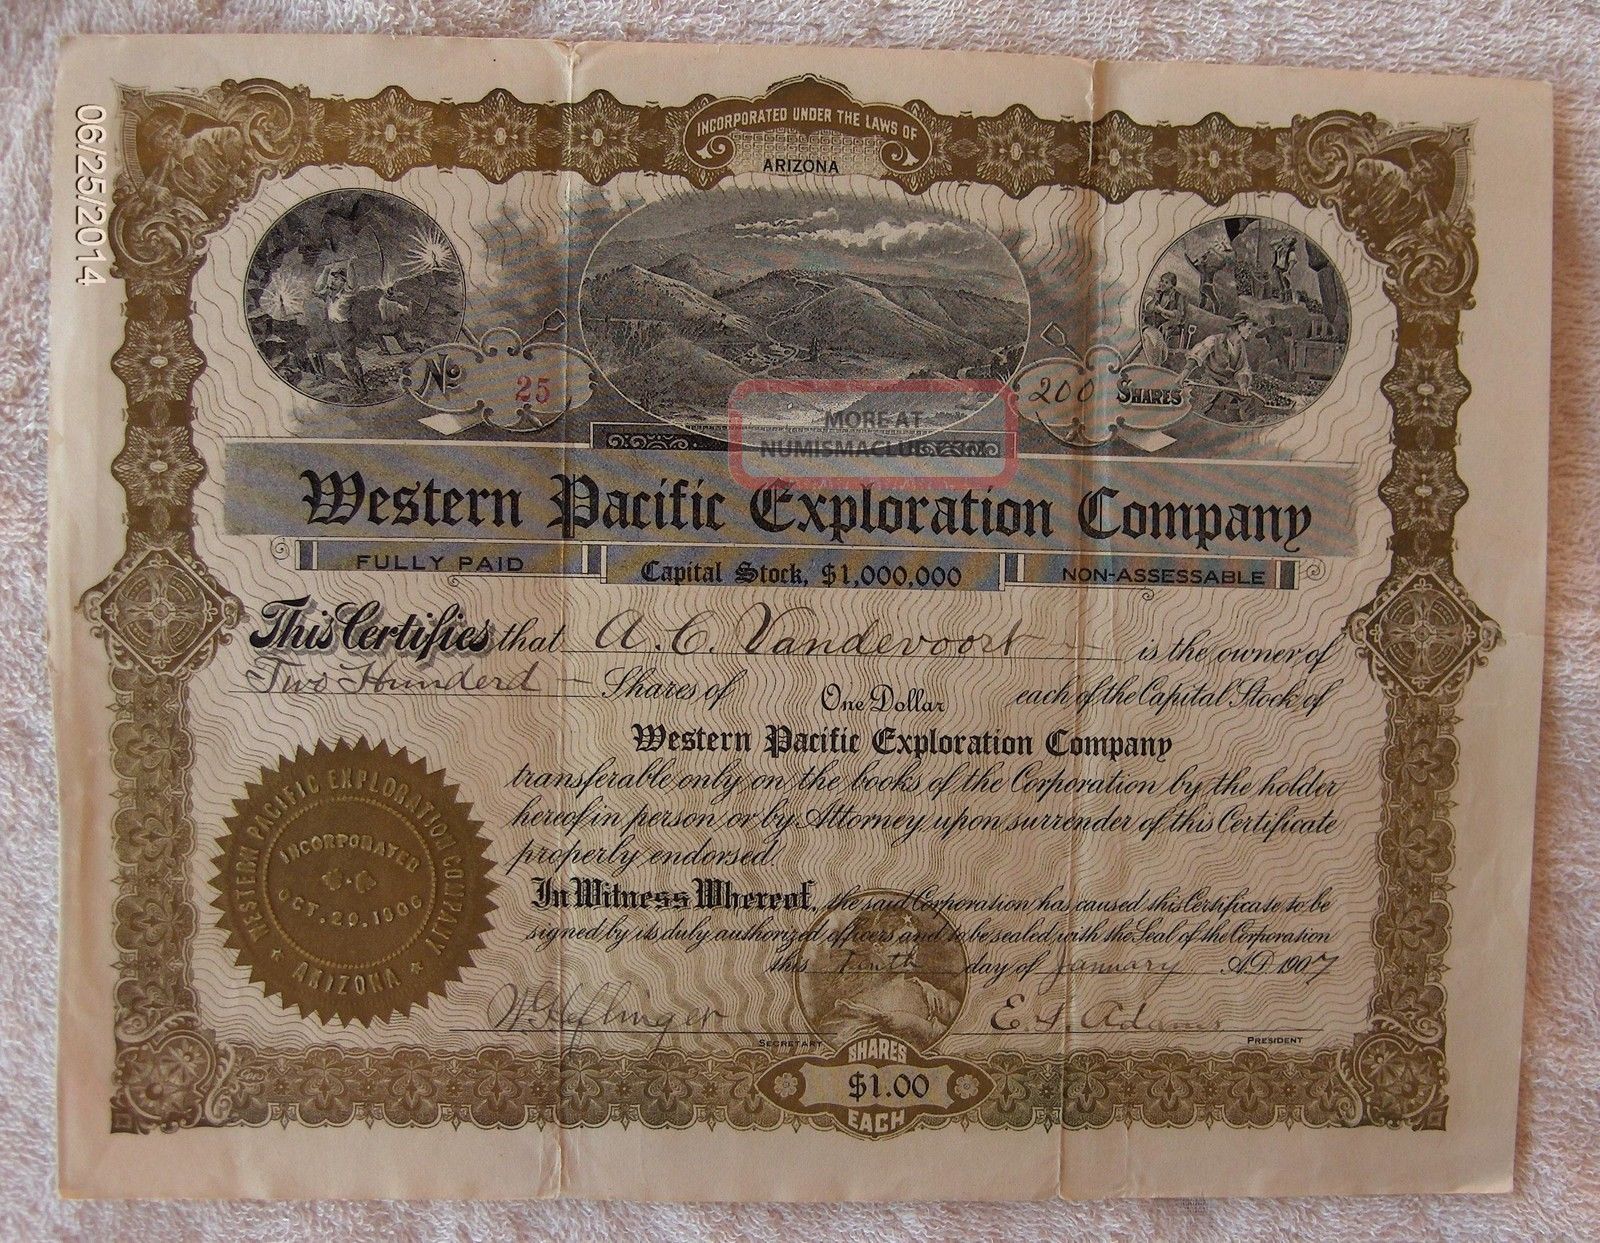 Western Pacific Exploration Company Stock Certificate - 1907